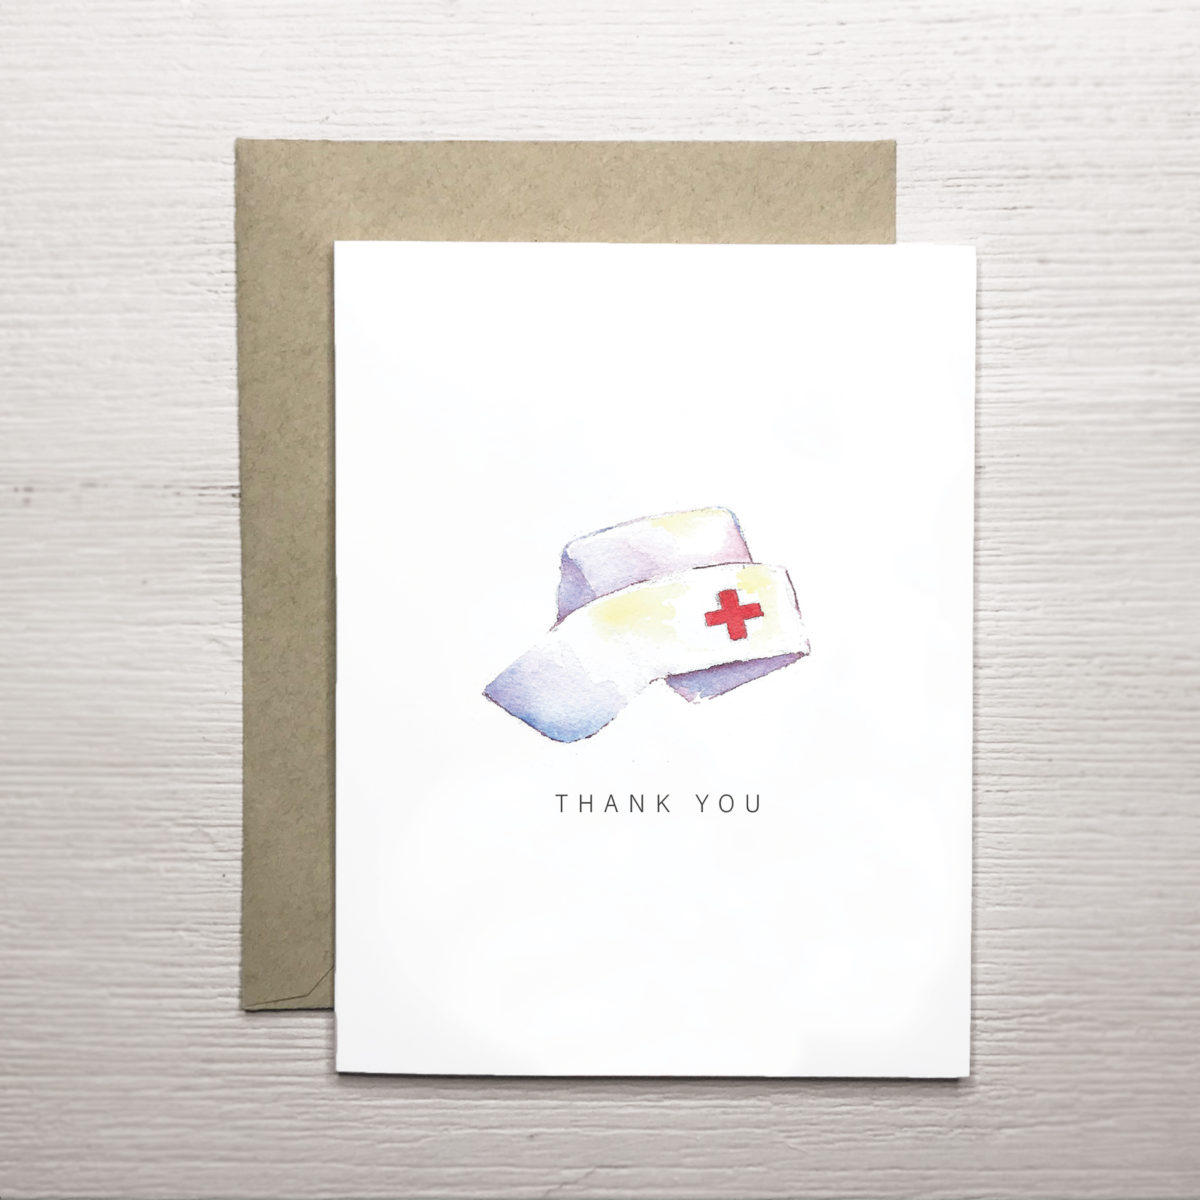 A2 greeting card with nurse hat and thank you